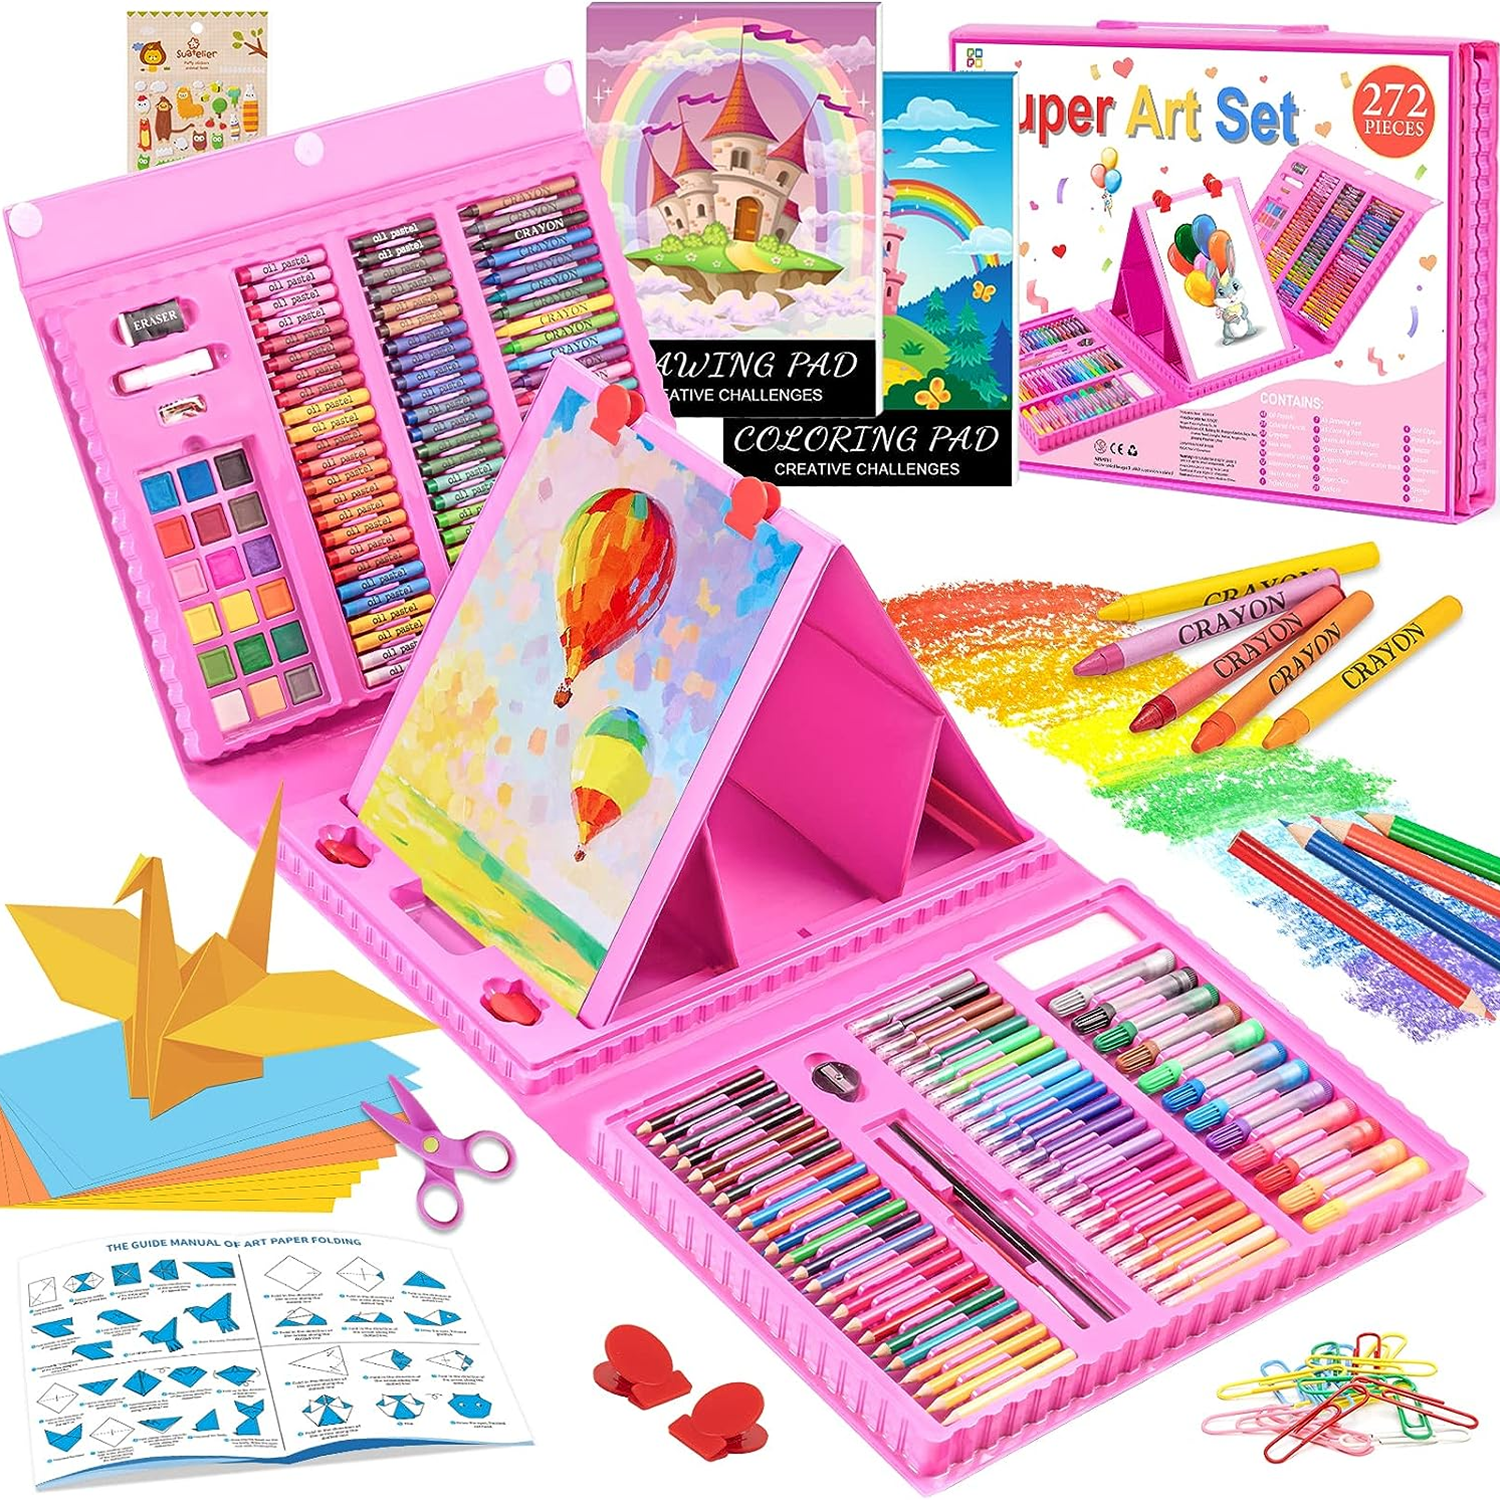 Tyko Arts Coloring Art Set，147pc Art Drawing Supplies,Art Painting Coloring  Kit,Portable Art & Crafts Supplies for Kids,Adult,Teens，As Gift for Girls